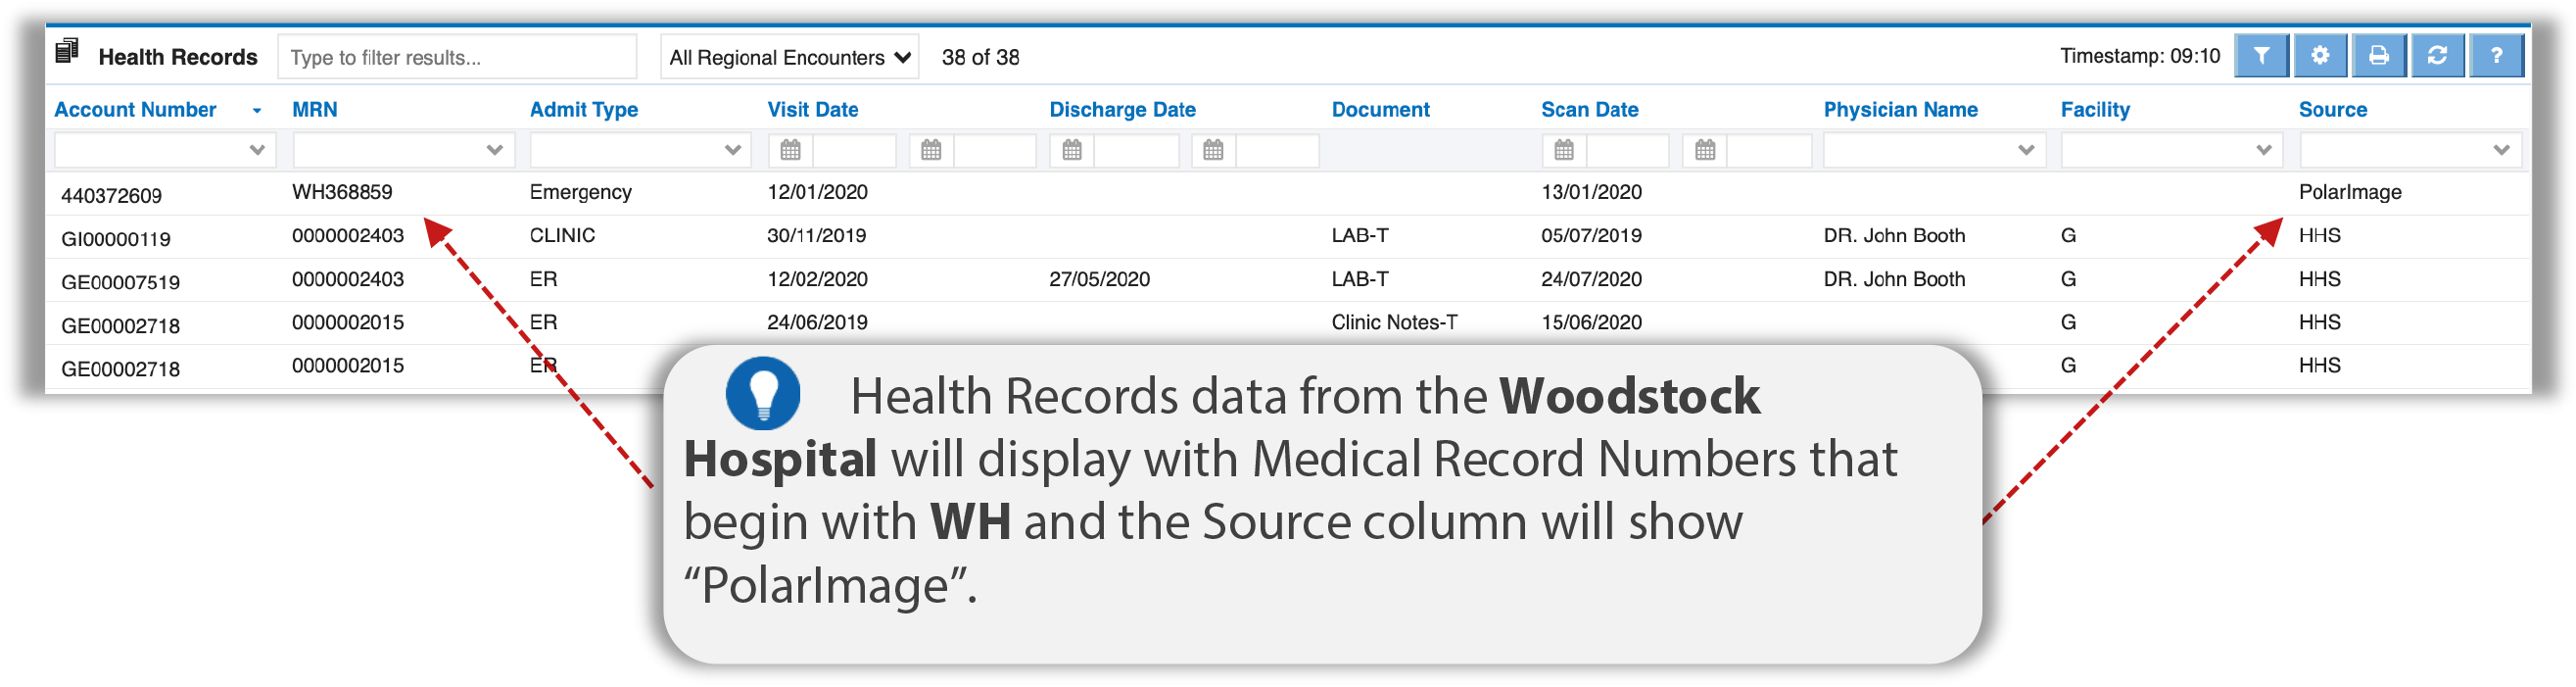 image of the health records module